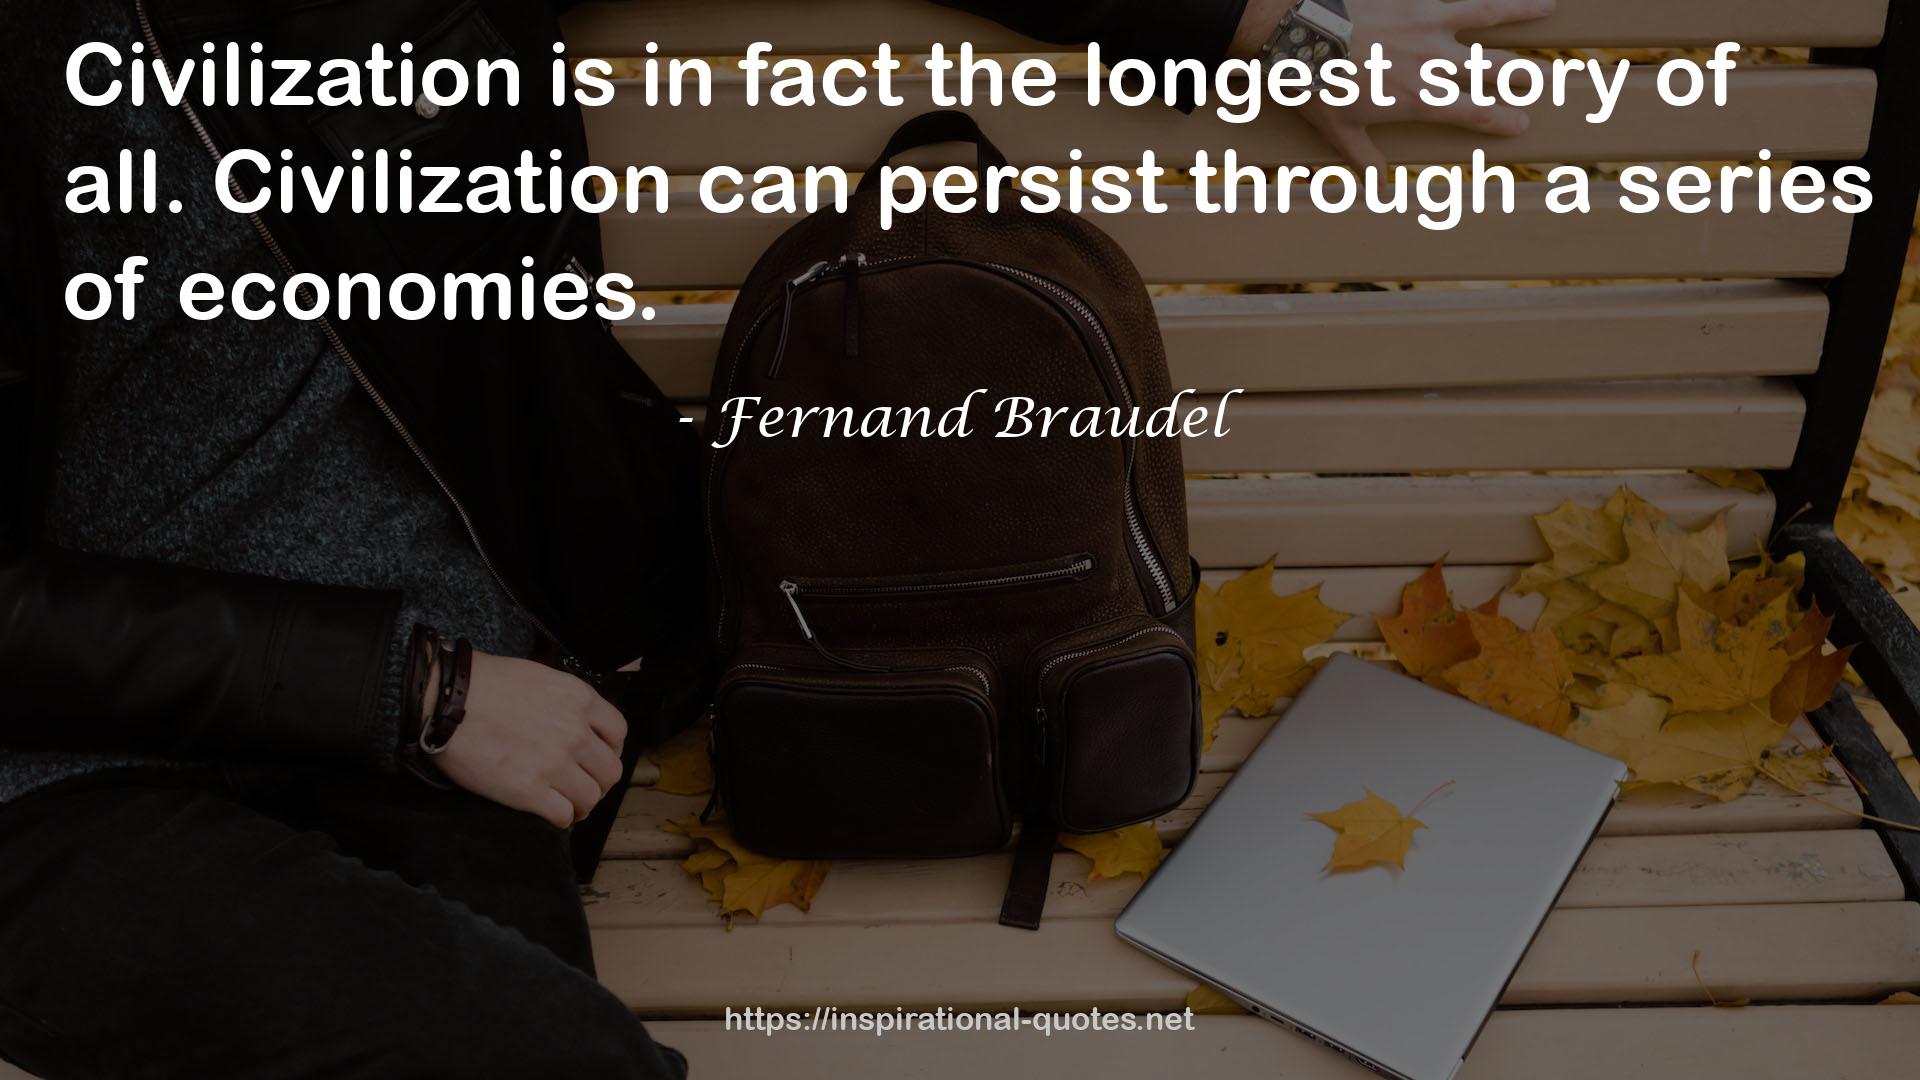 Fernand Braudel QUOTES